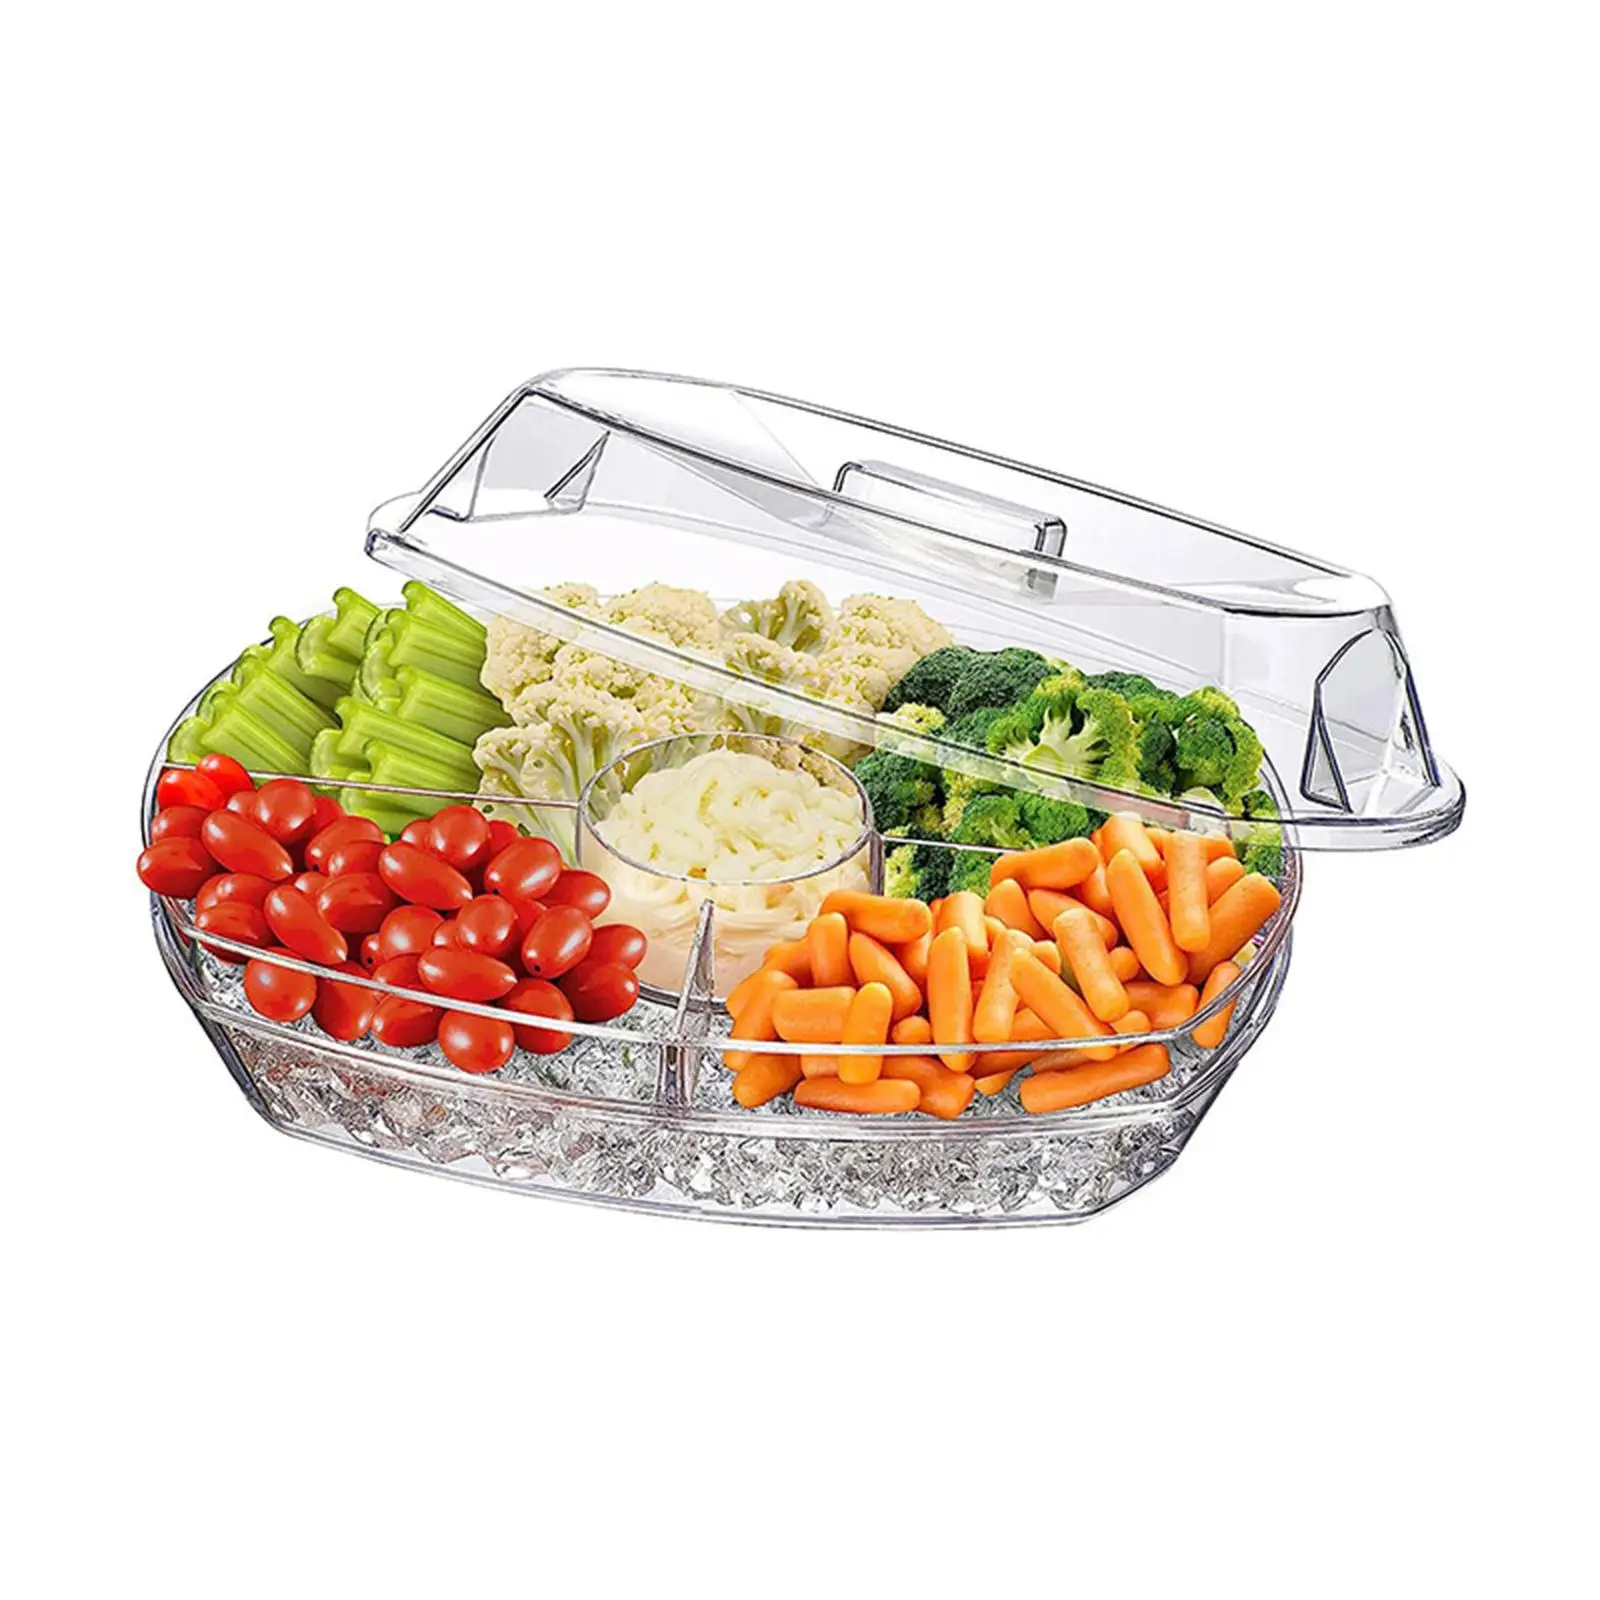 Ice Chilled Condiment Server Caddy 4 Sections Dispenser for Restaurant